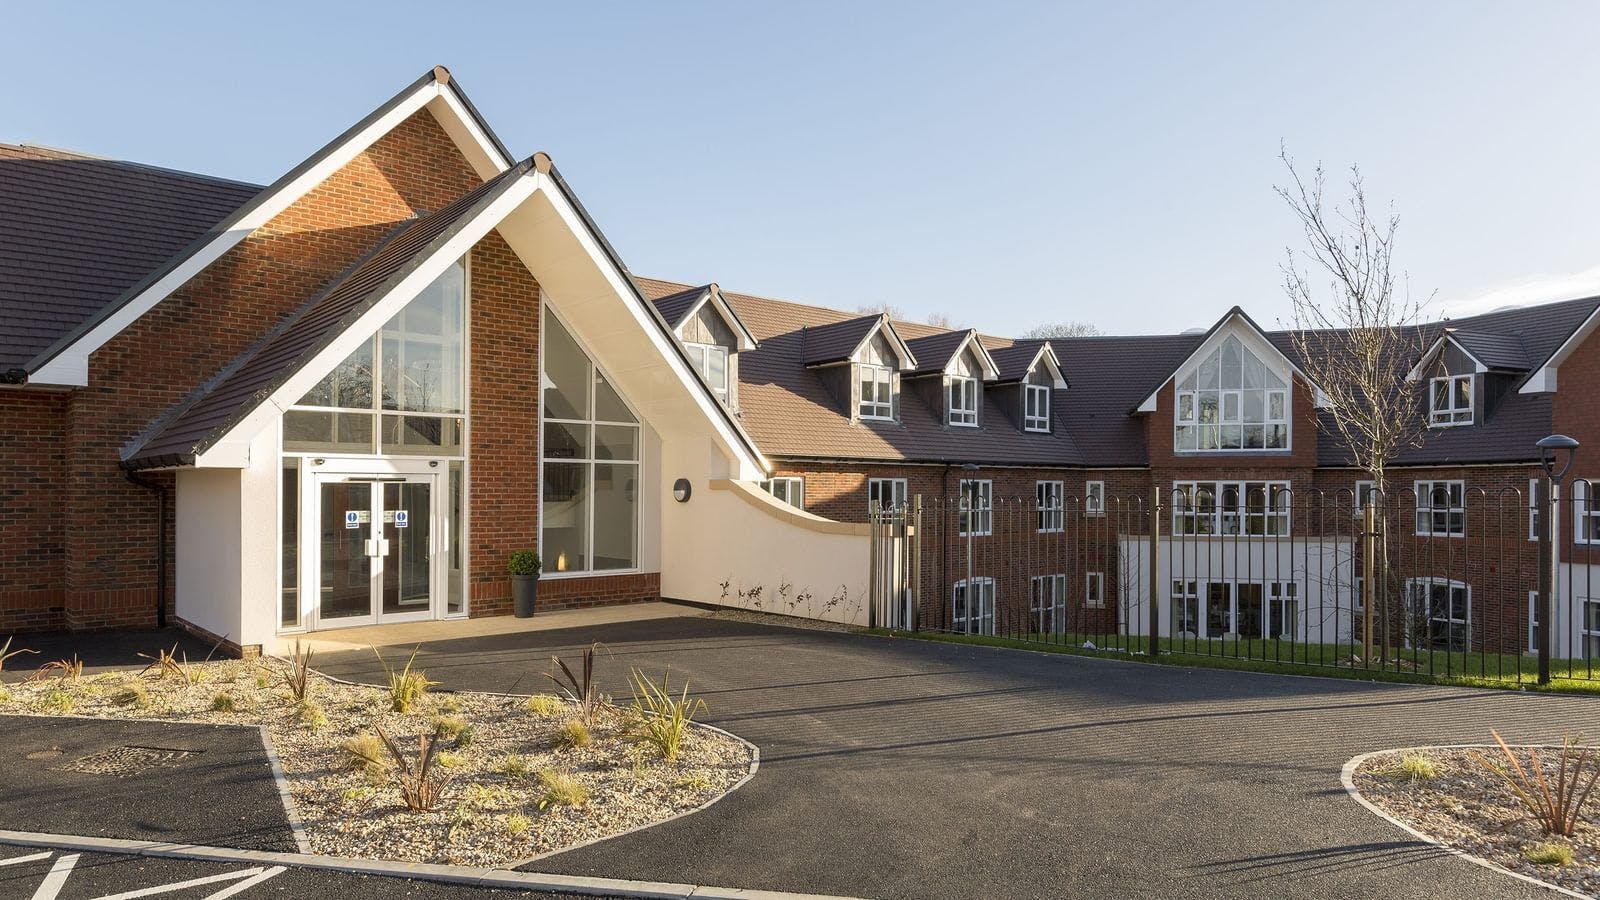 Exterior of Blenheim Court Care Home in Liss, East Hampshire